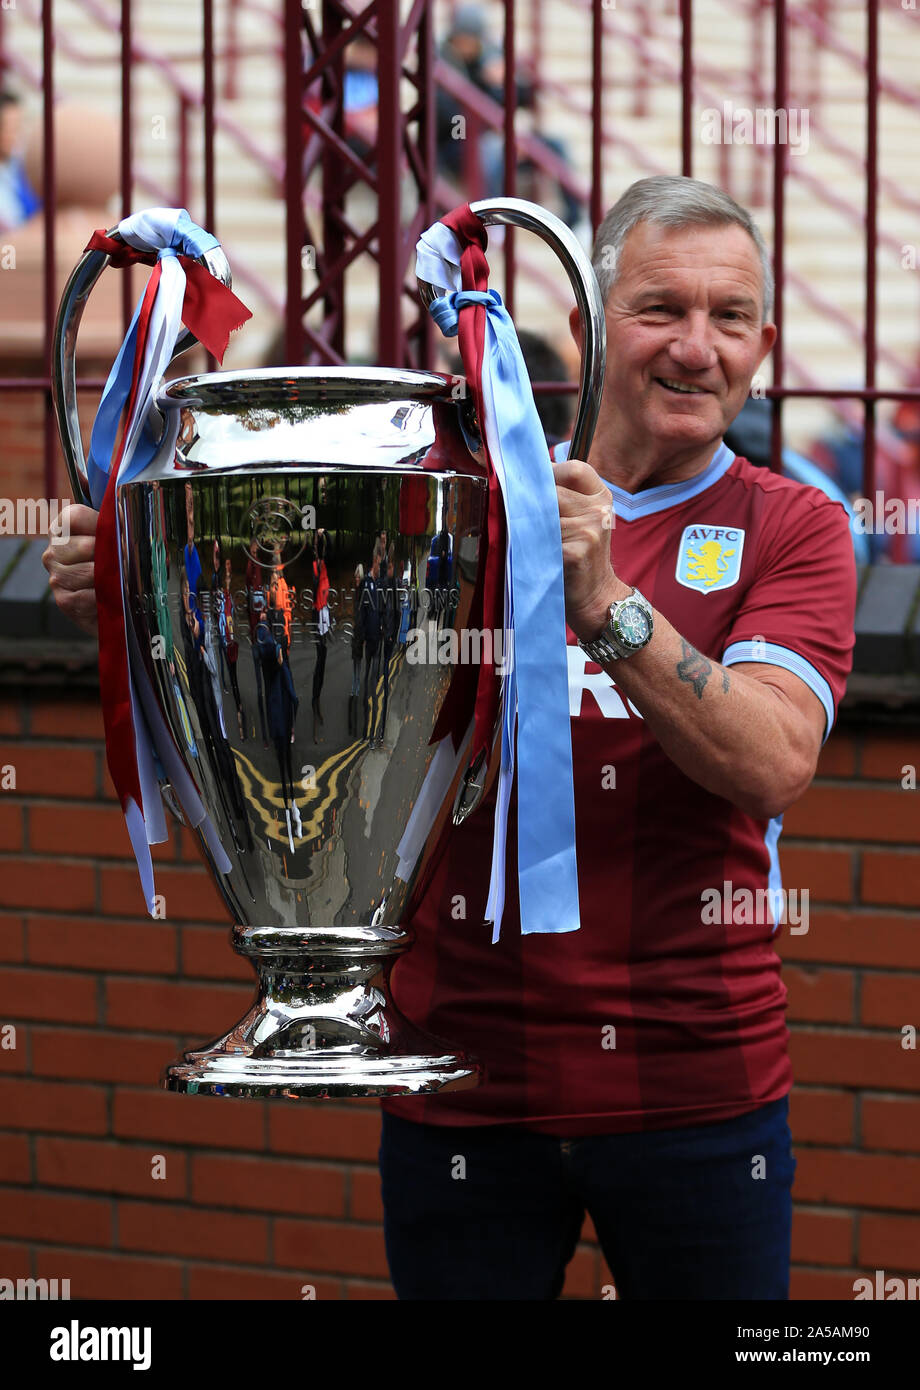 Aston Villa European Cup High Resolution Stock Photography and Images -  Alamy